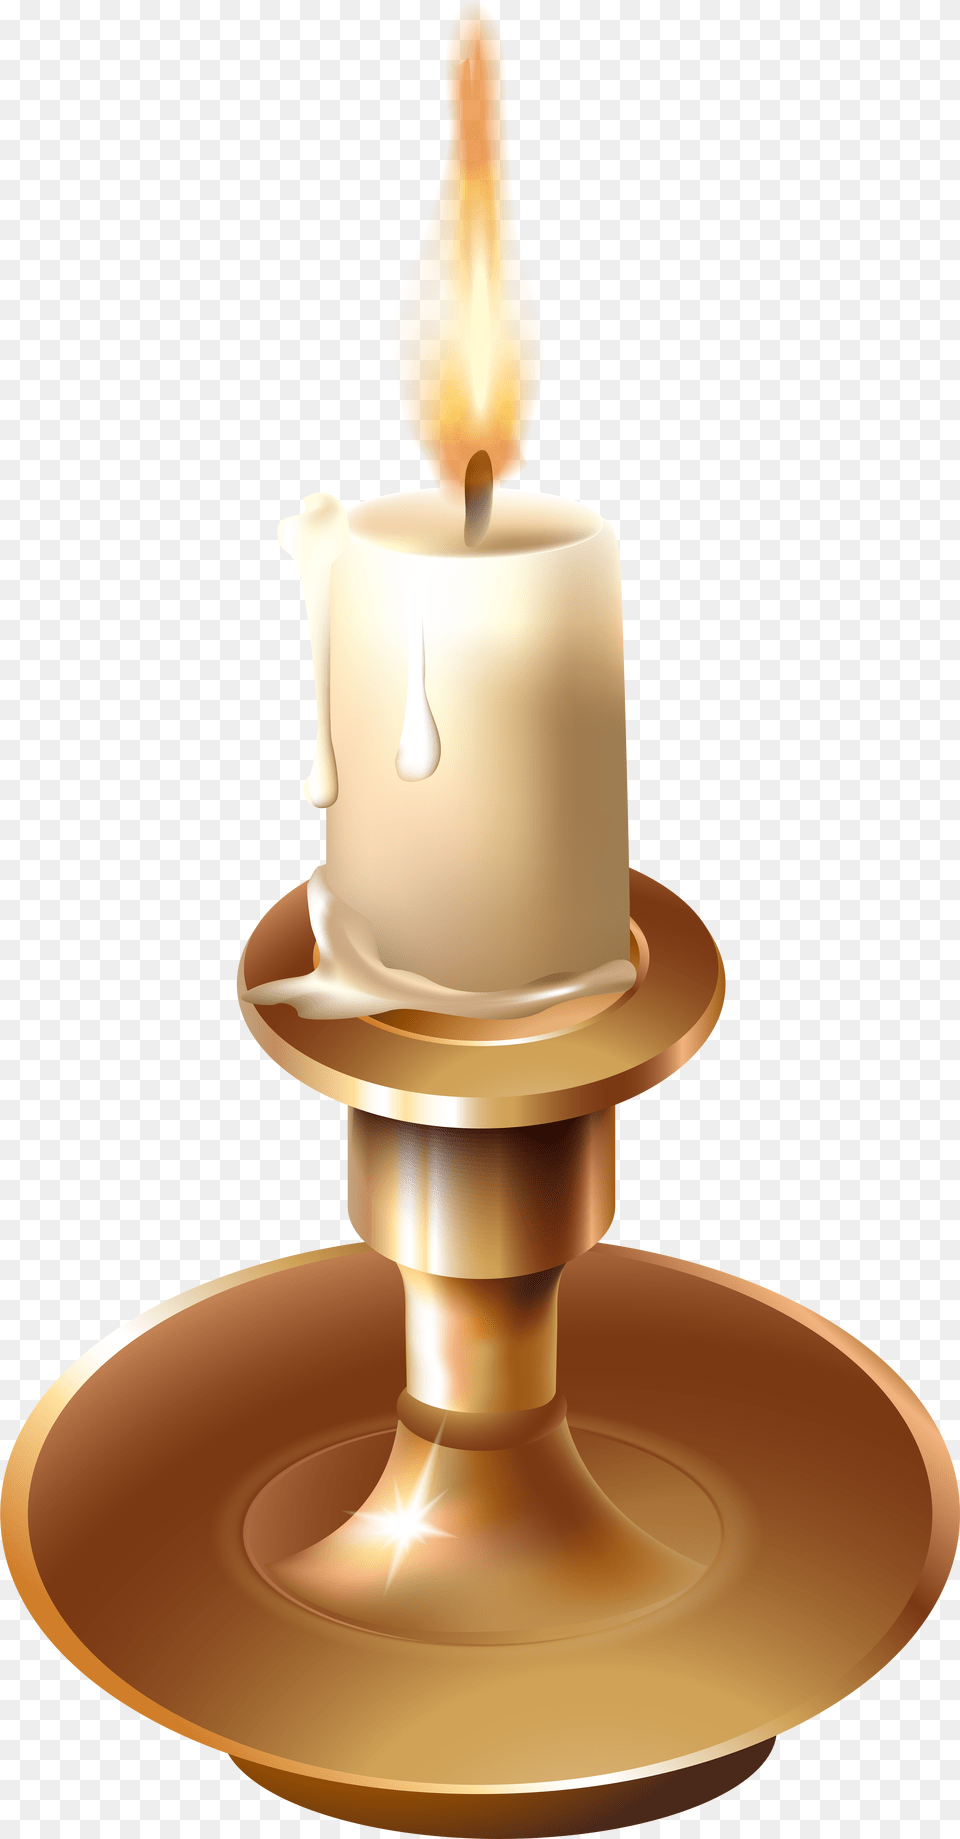 Clip Art Candlestick Clipart Candle In Candlestick Free Png